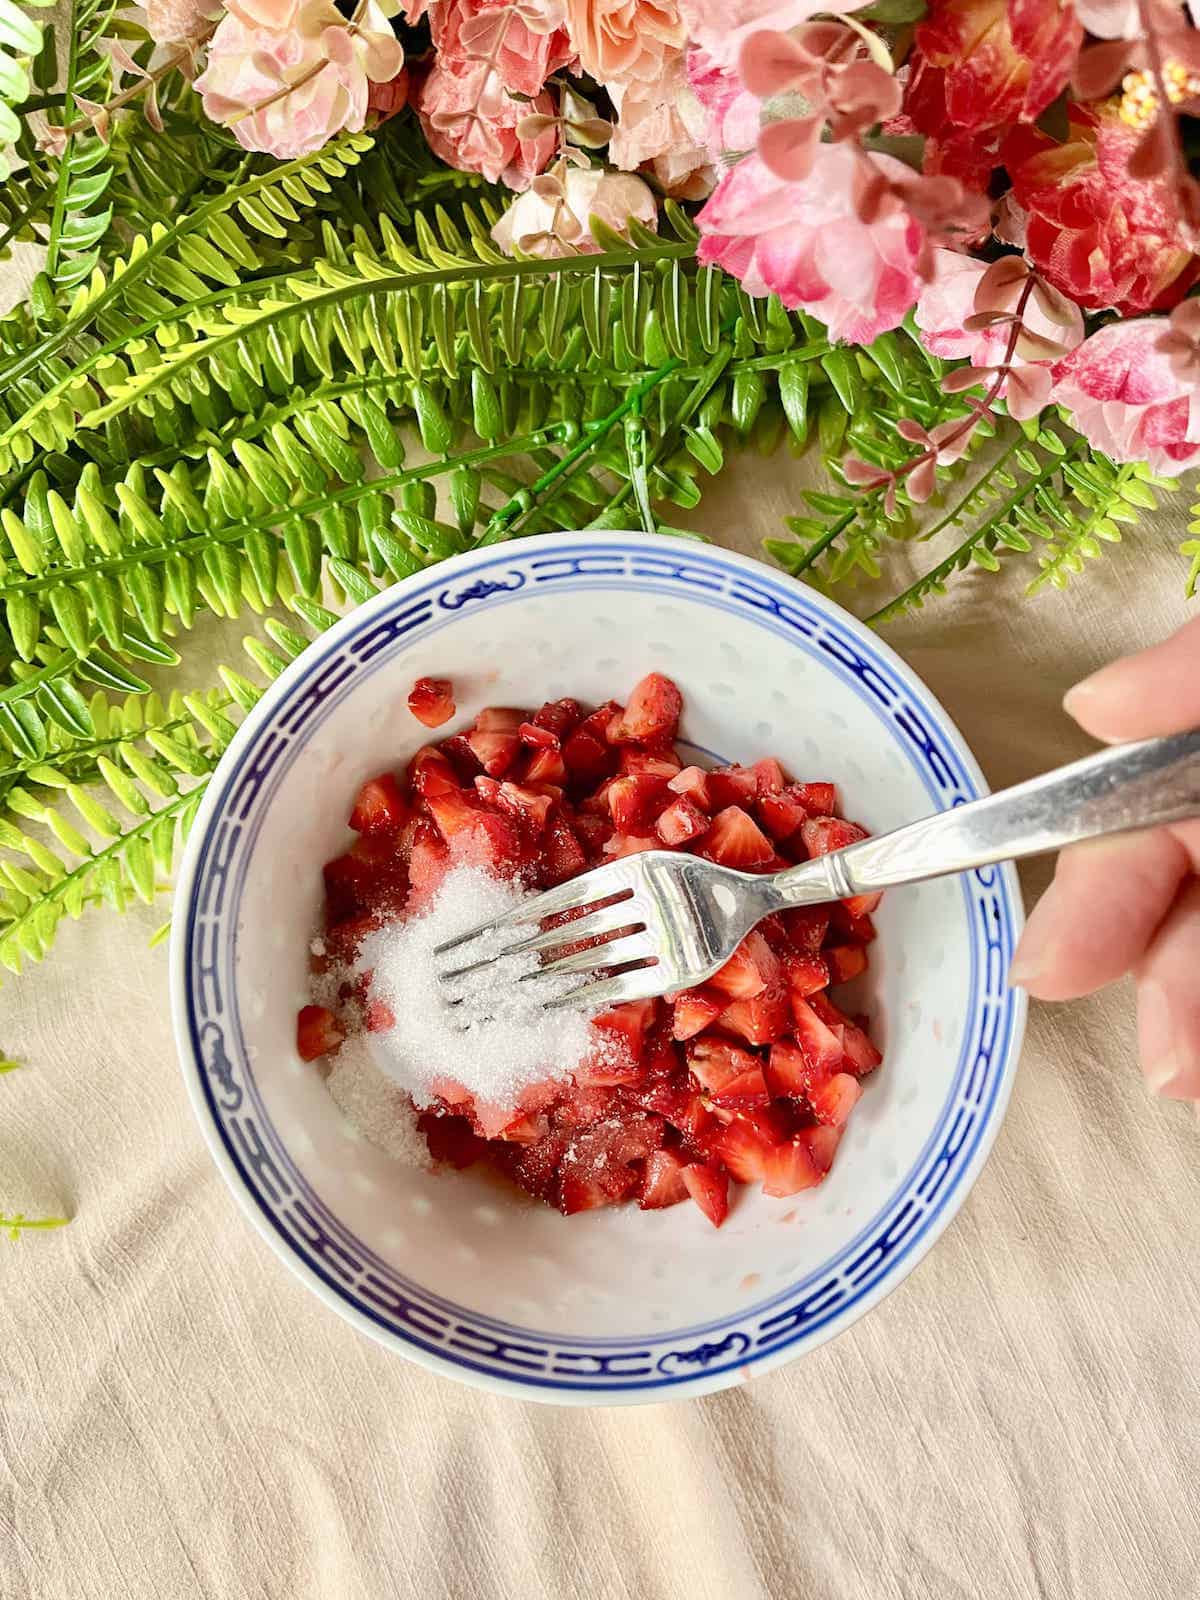 Mashing cut up strawberries with white sugar using a fork.